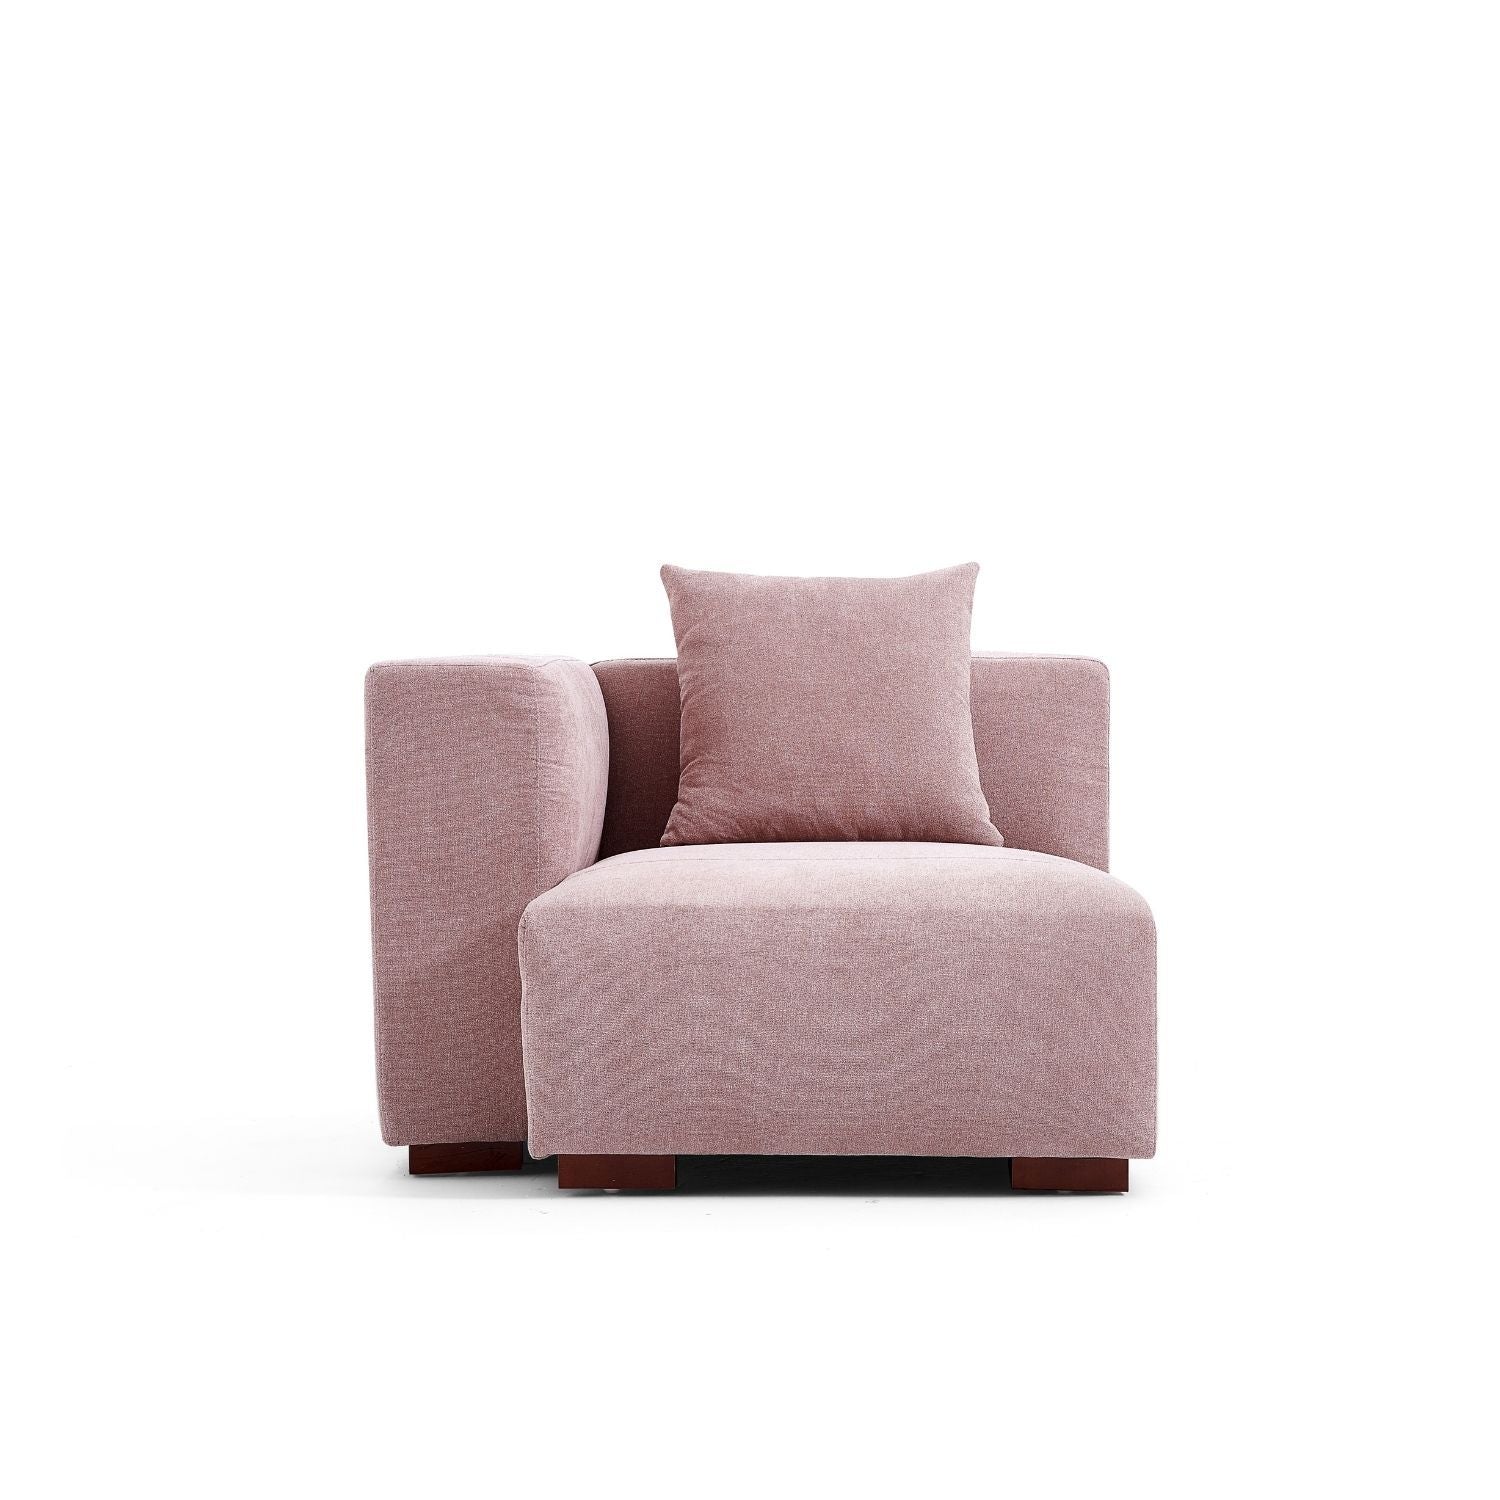 Valmolar - Chase Sofa OHDOME Nude Pink Facing left 